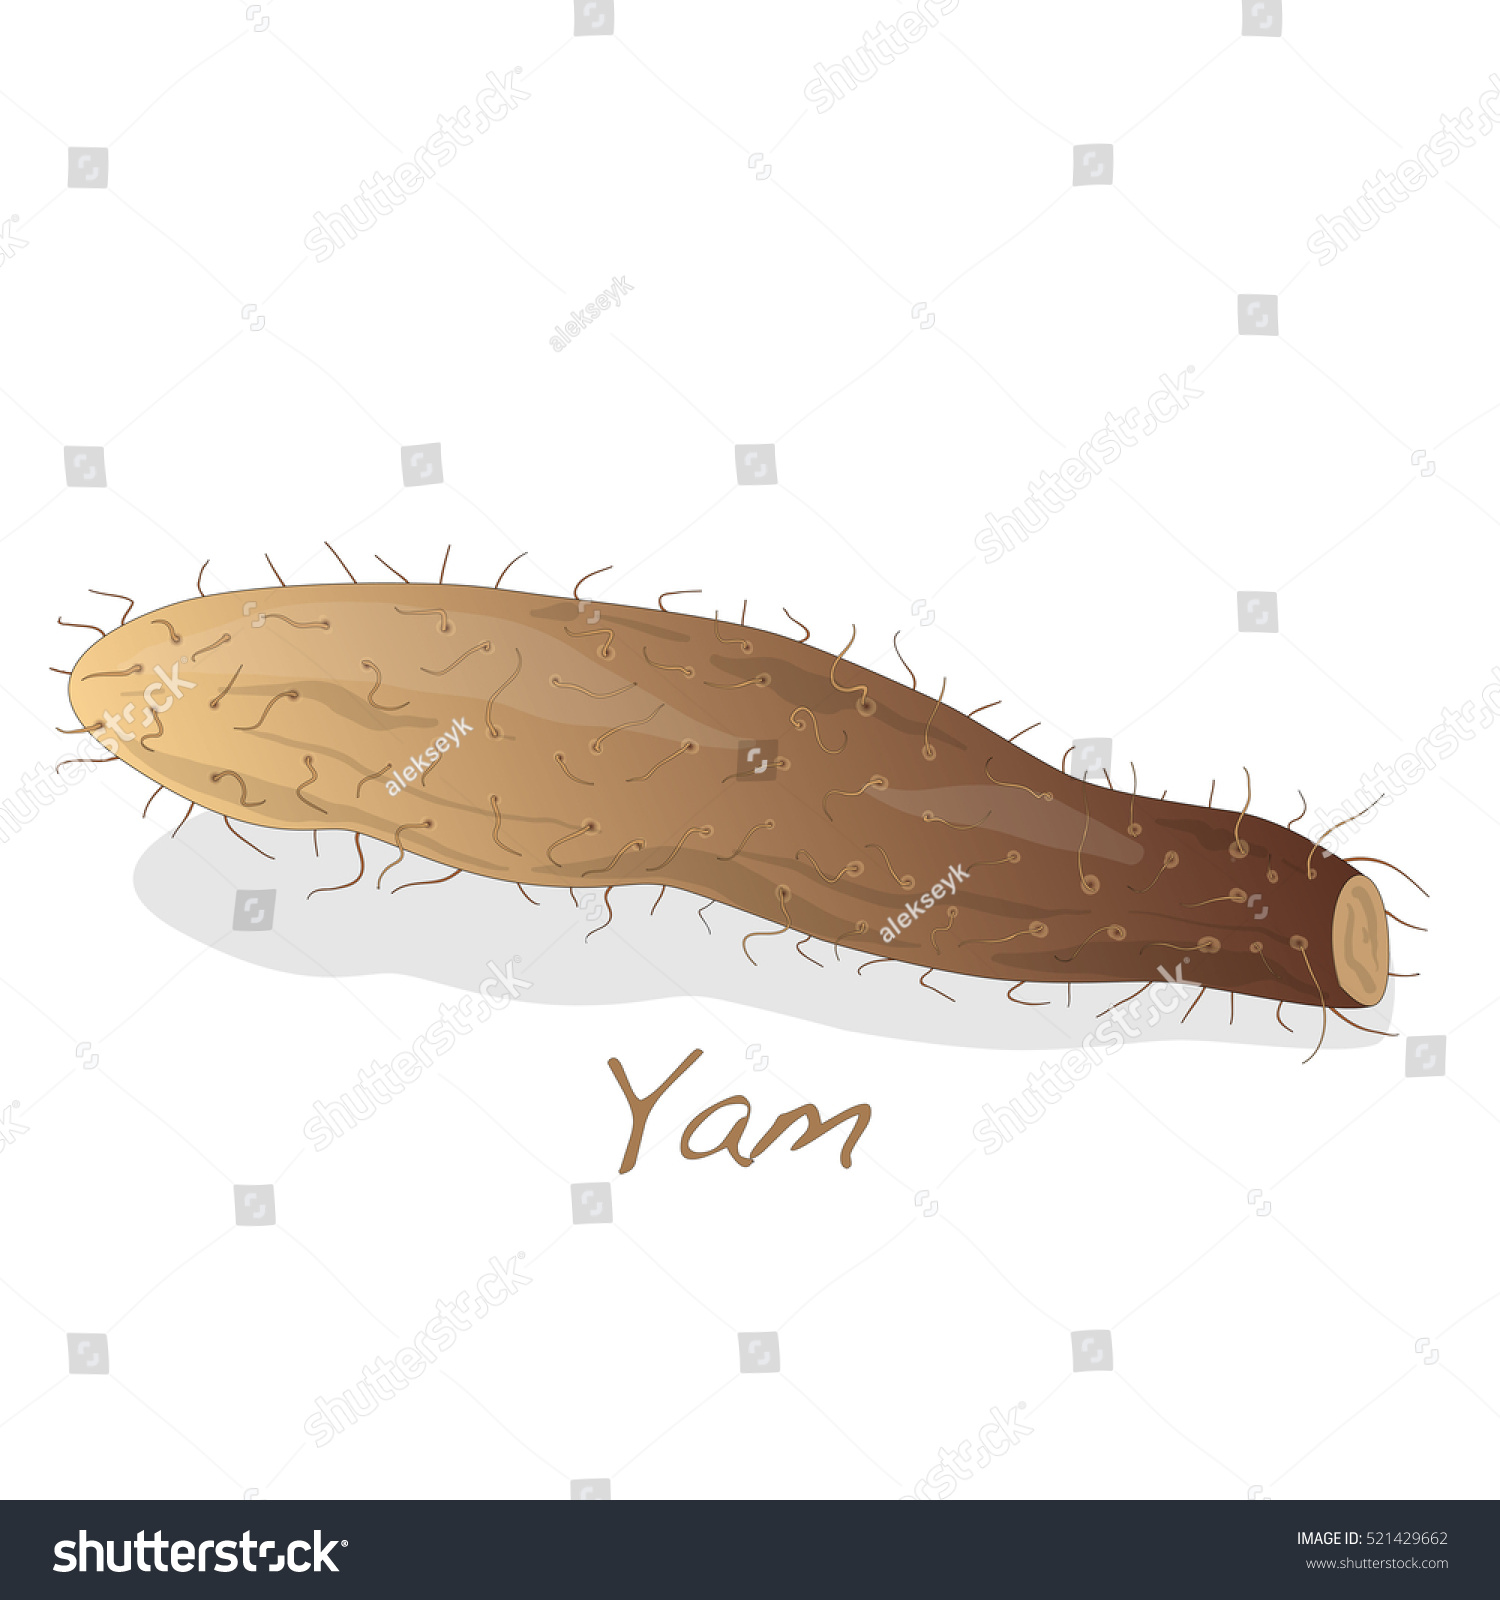 Yam Vector Isolated - 521429662 : Shutterstock